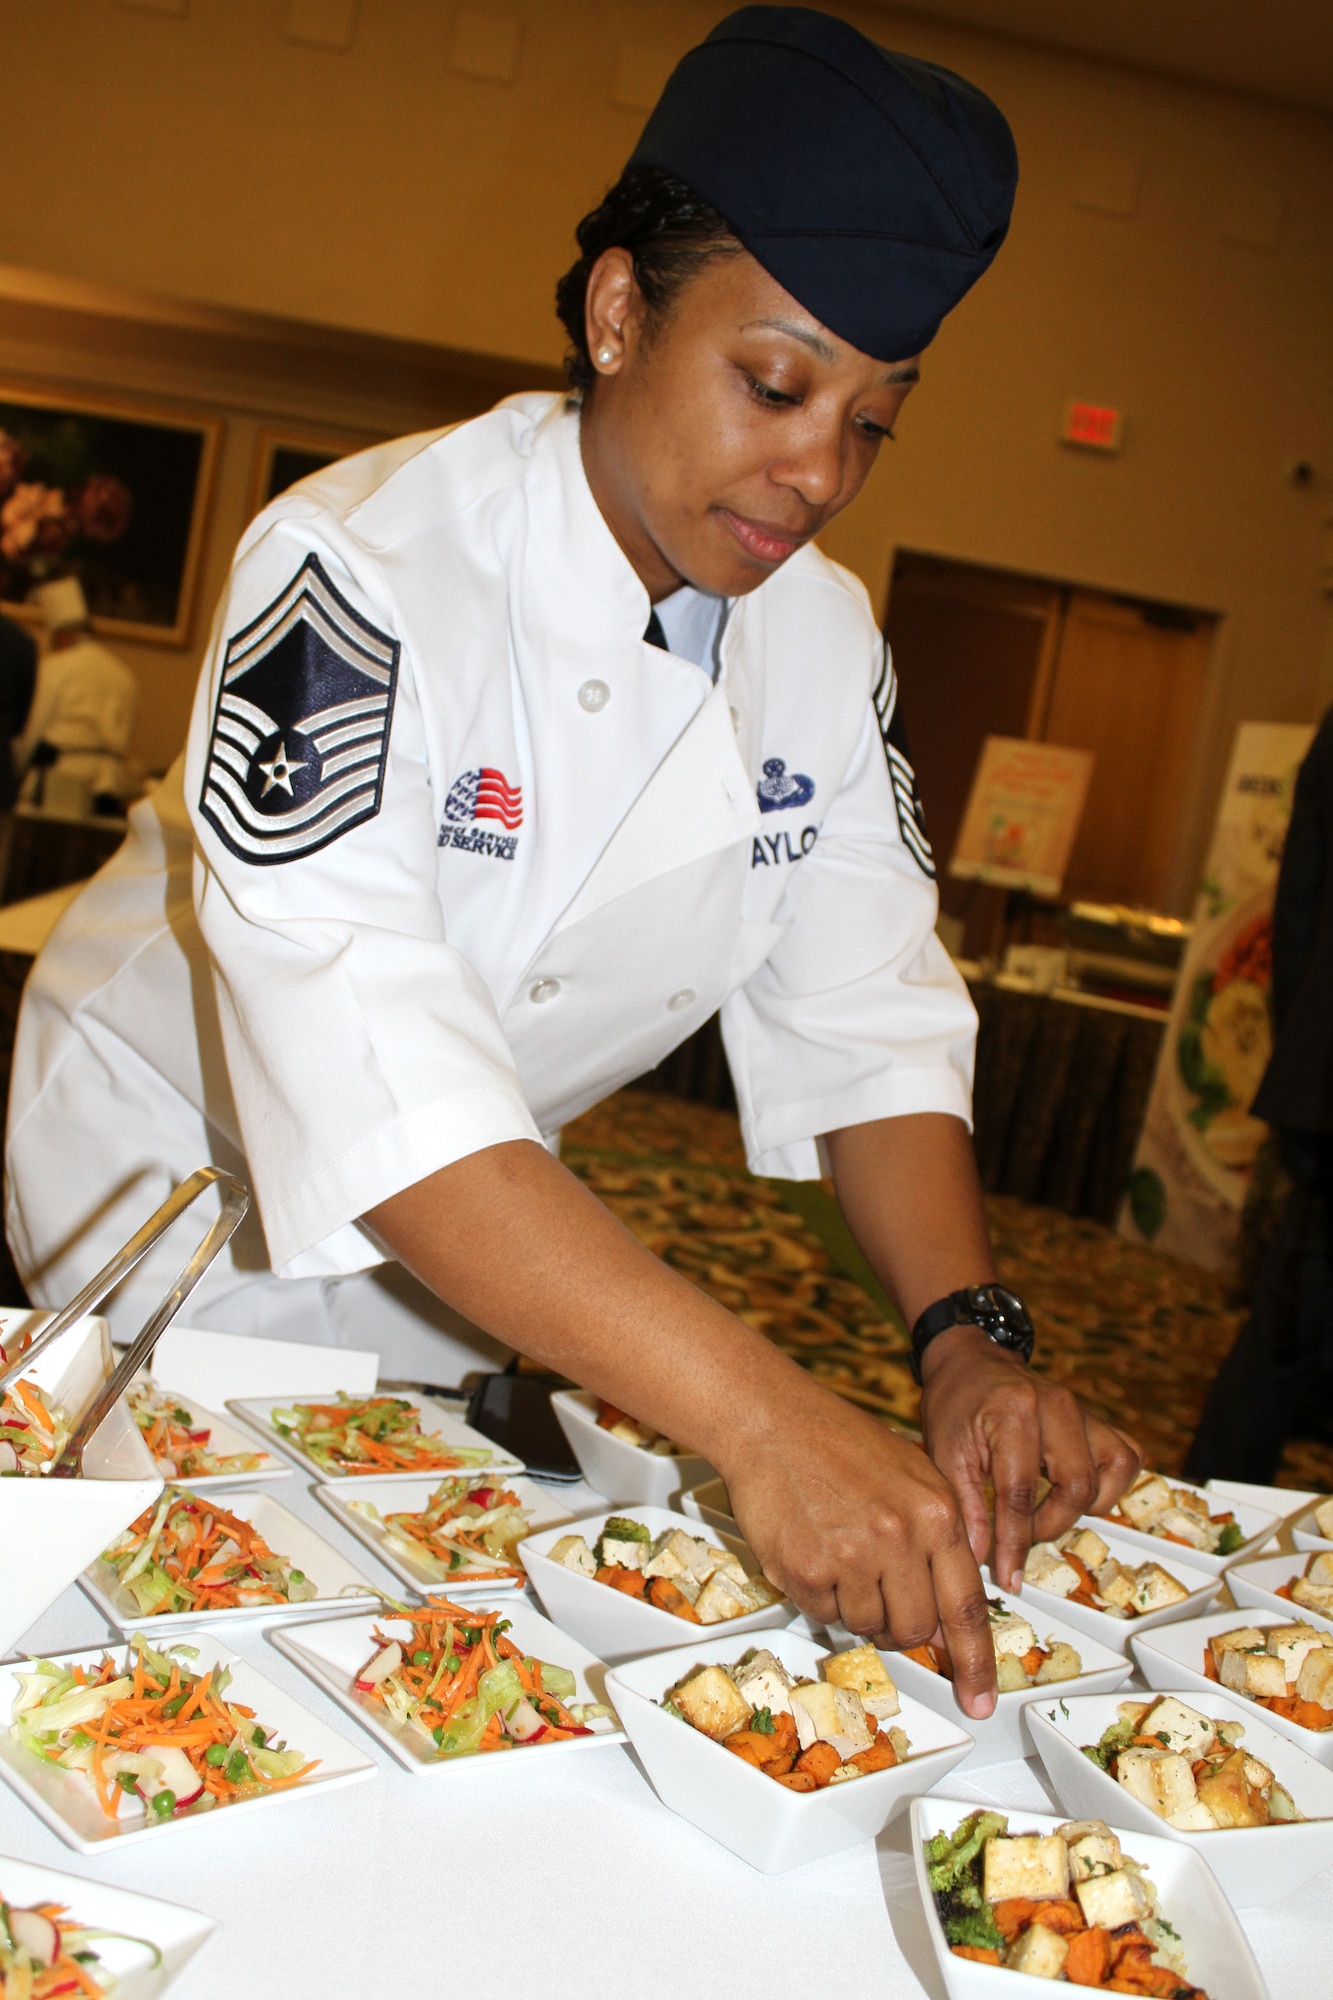 Senior Master Sgt. Tashon Taylor, AFSVA Food and Beverage superintendent, positions grain bowls with grilled tofu for a Healthy Food Initiative lunch during the General Officer and Senior Executive Service Summit April 10, 2019, at Joint Base San Antonio-Lackland. AFSVA prepared various healthy and nutritious food items to familiarize summit attendees with Healthy Food Initiative, a dining concept being rolled out across the Air Force that’s designed to deliver fresh, healthy, nutritious and tasty food to Airmen. (U.S. Air Force photo by Debbie Aragon)